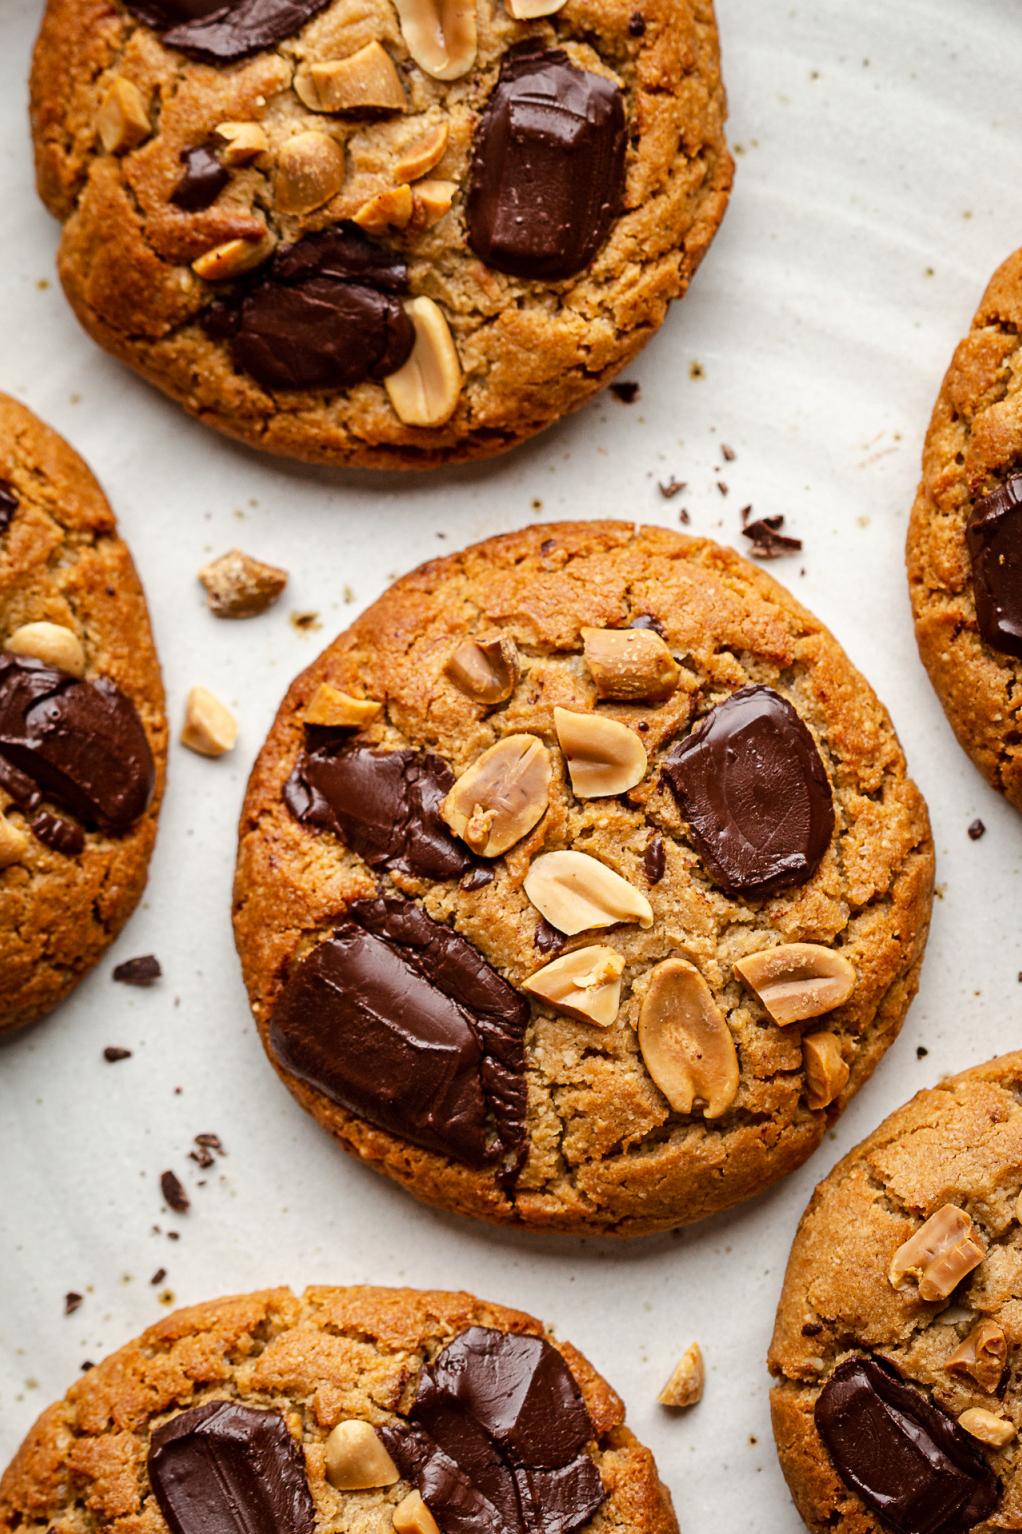  With their crunchy exterior and soft, gooey interior, these vegan peanut butter cookies are an irresistible treat for all cookie lovers.